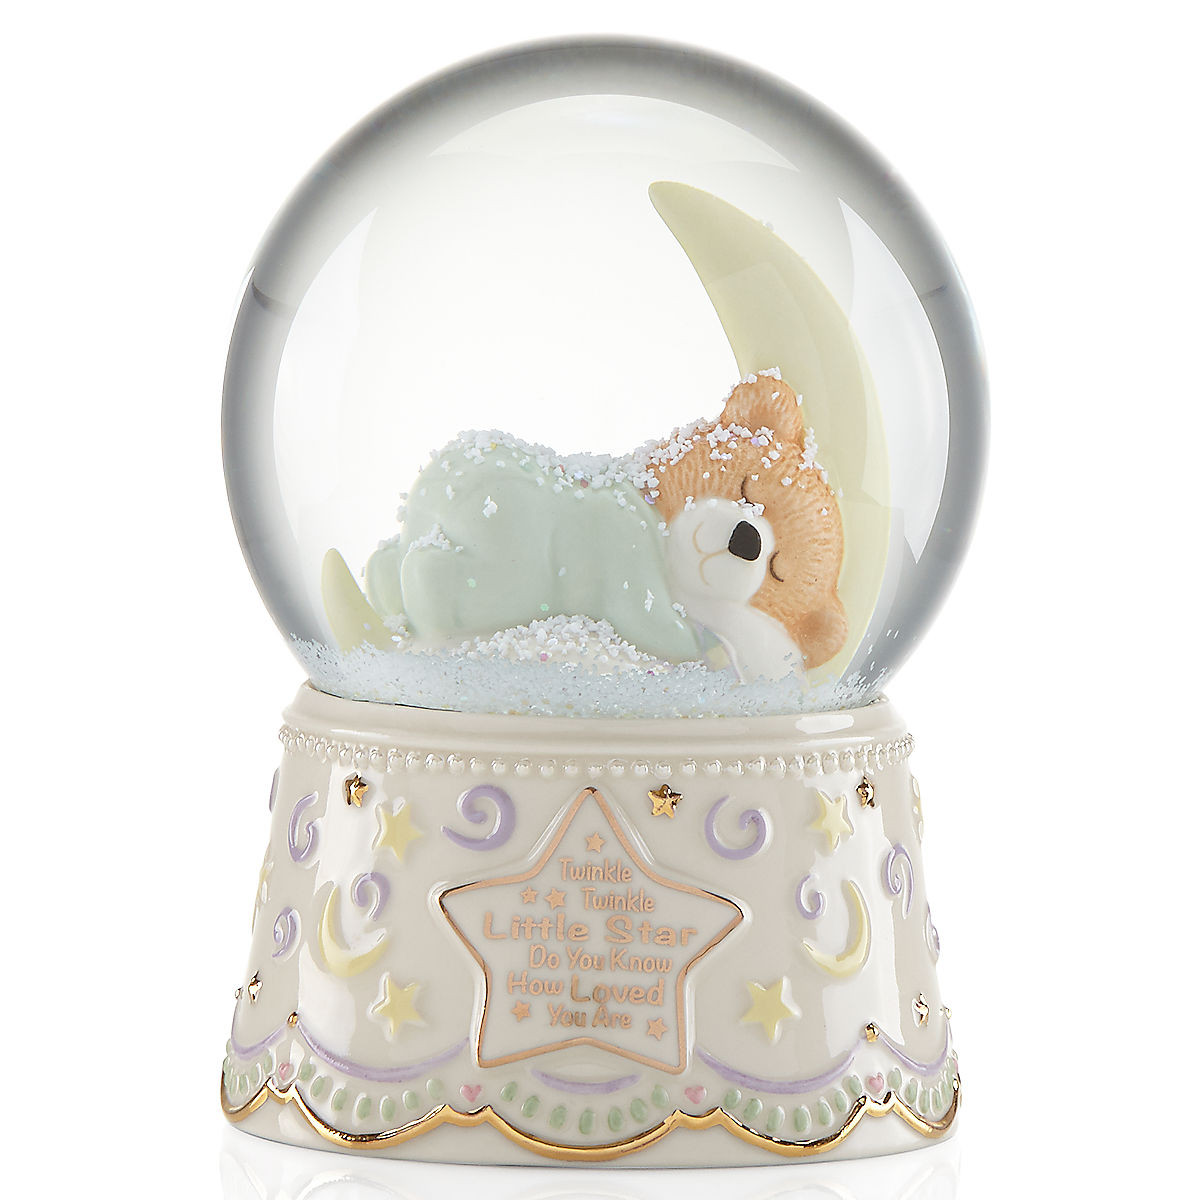 Musical Baby Gifts
 Lullaby Baby Musical Waterglobe